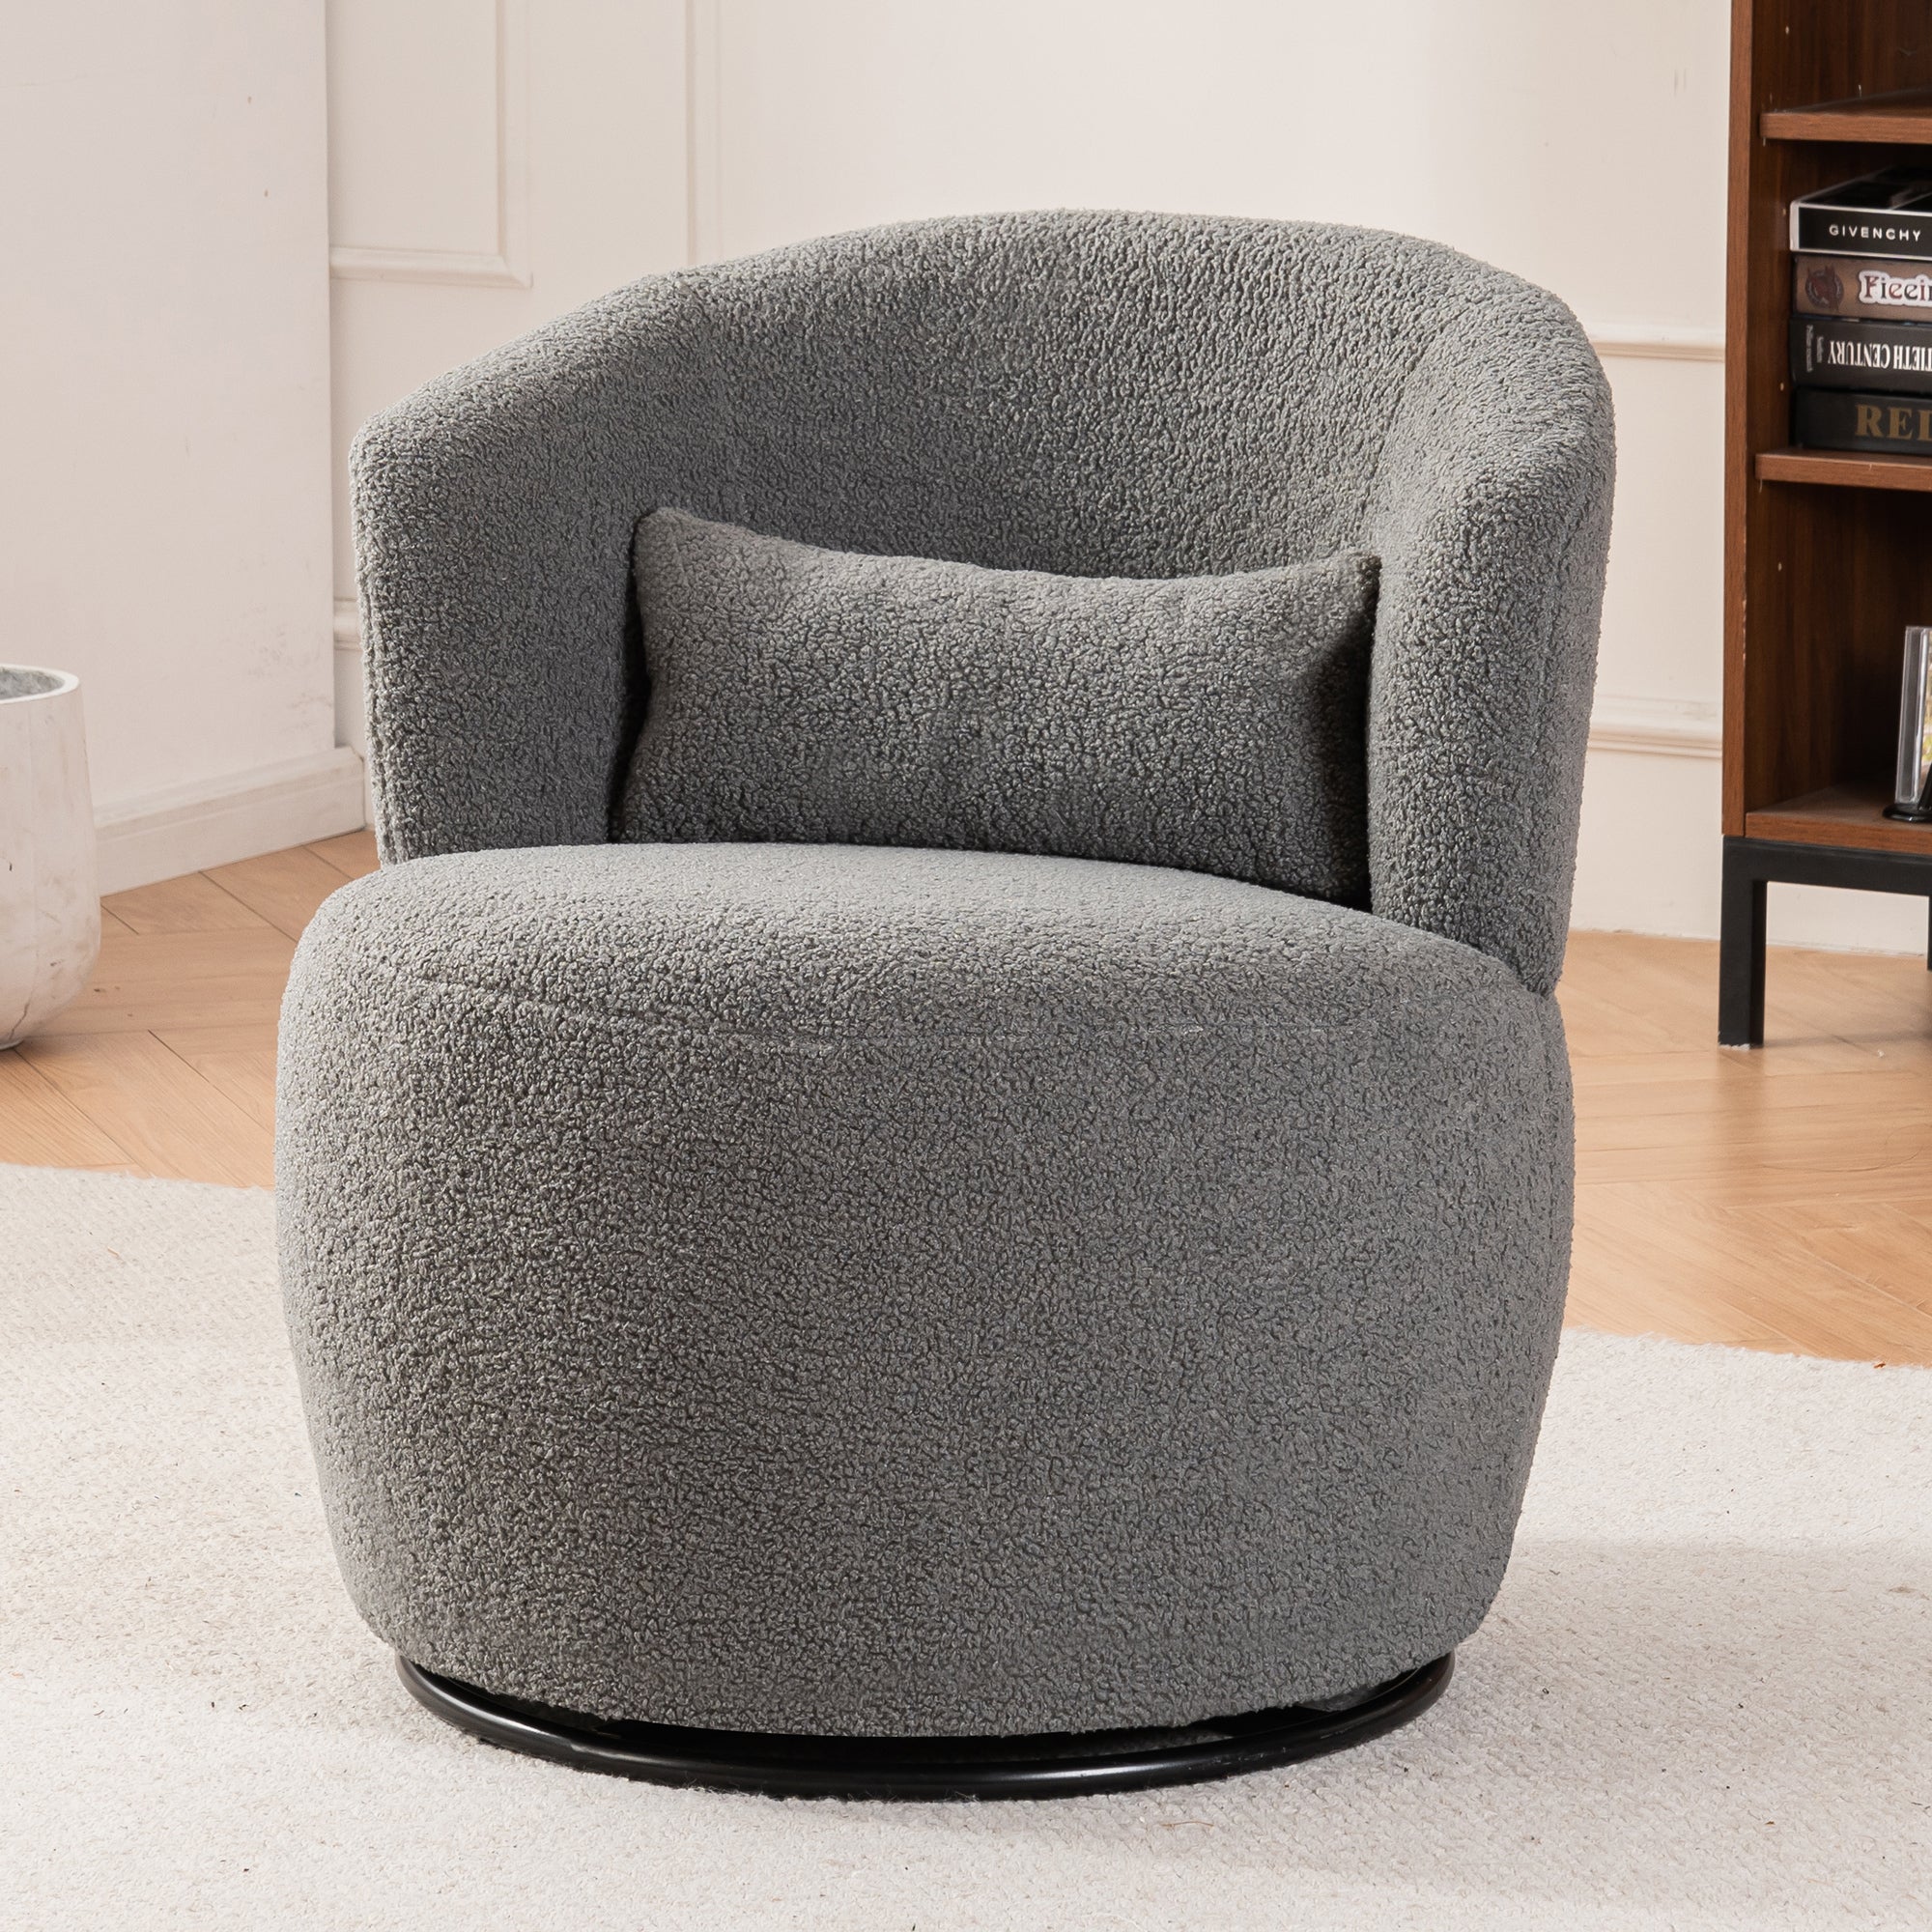 🆓🚛 Cozy Plush Swivel Accent Chair - Contemporary Round Armchair With 360° Rotation and Metal Base for Living Room Elegance, Gray